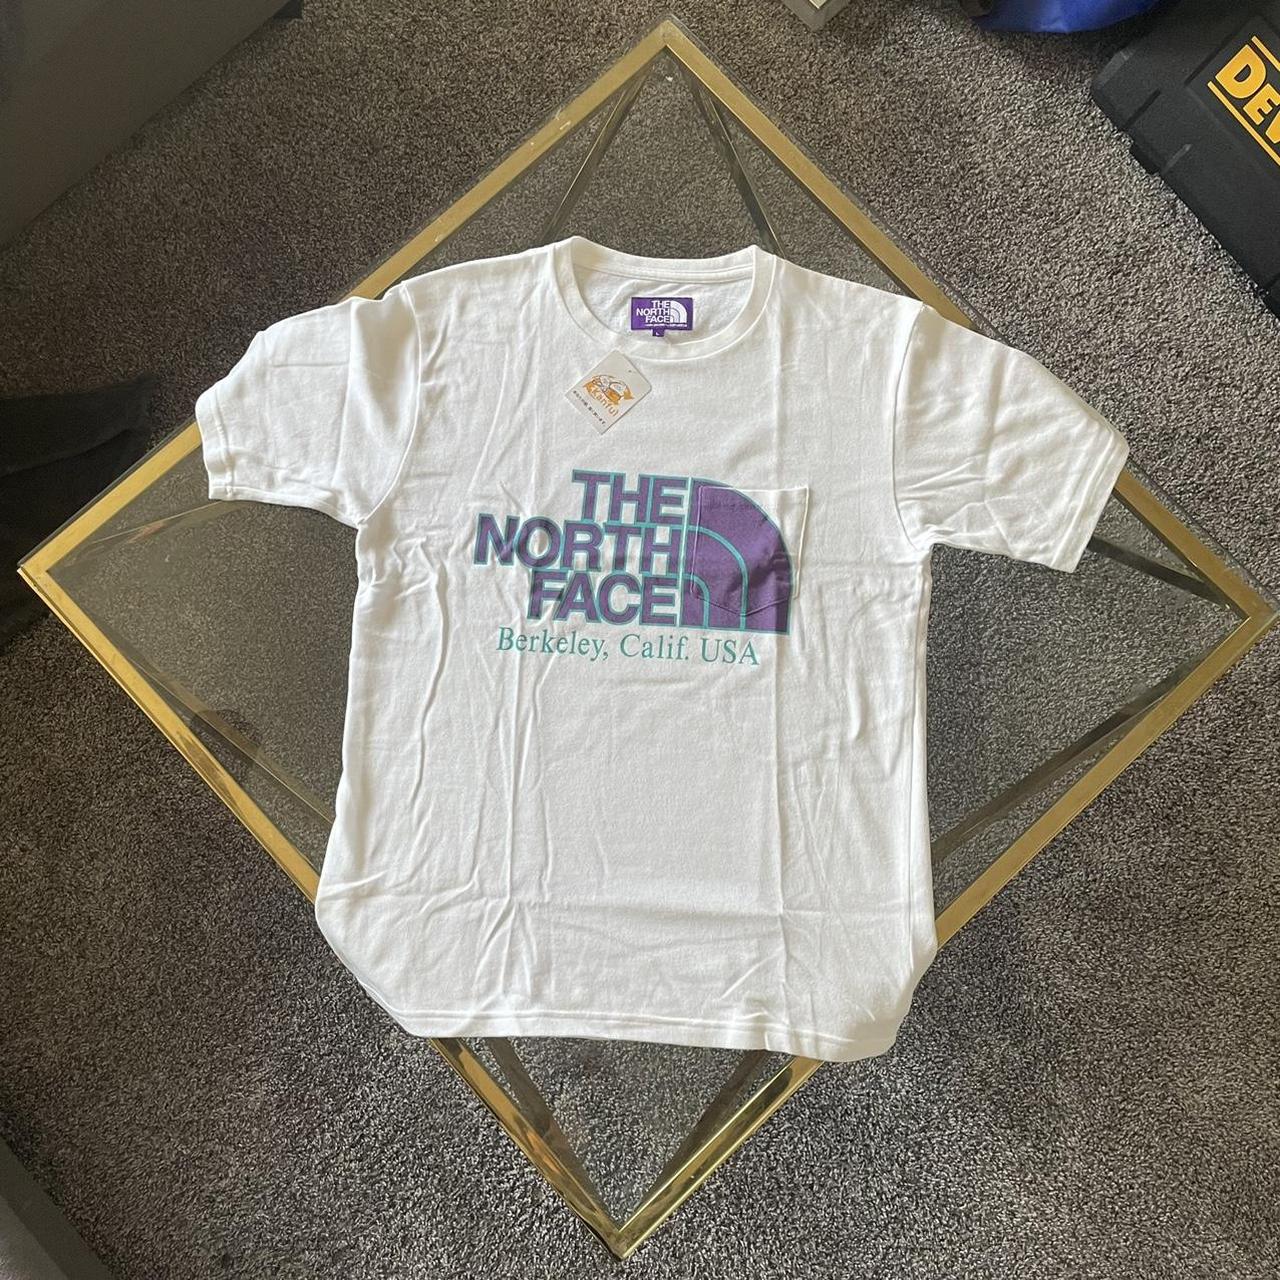 The North Face Purple Label Men's White and Purple T-shirt